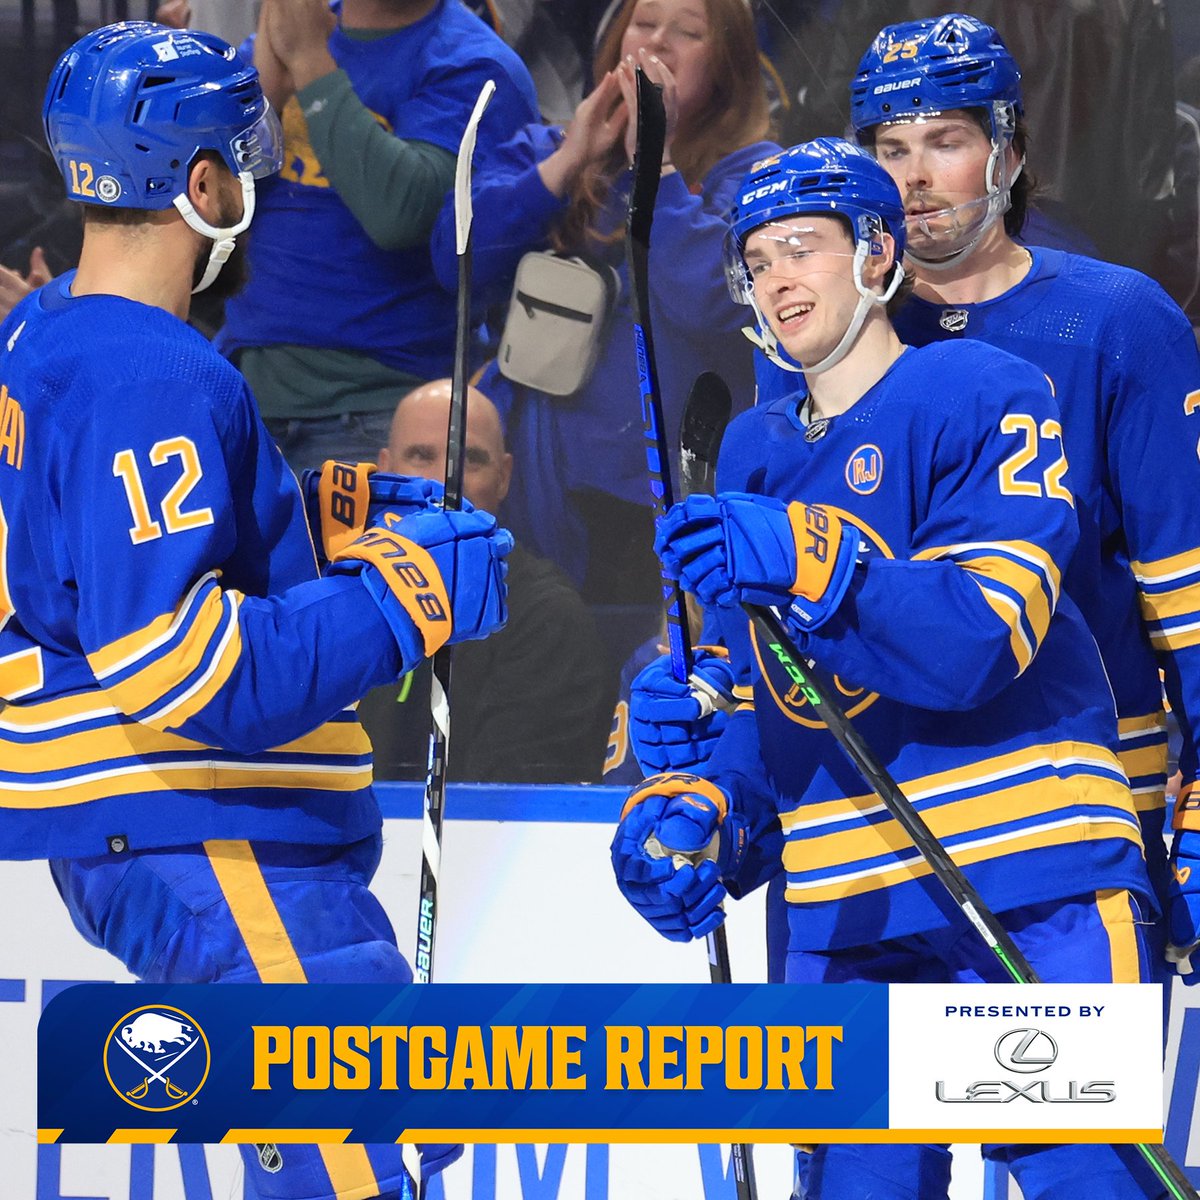 'We’re still playing hockey games and we still represent the city and the Sabres, so we have to give 110-percent, like always.” Recapping last night's win over Washington: bufsabres.co/4cSoepE